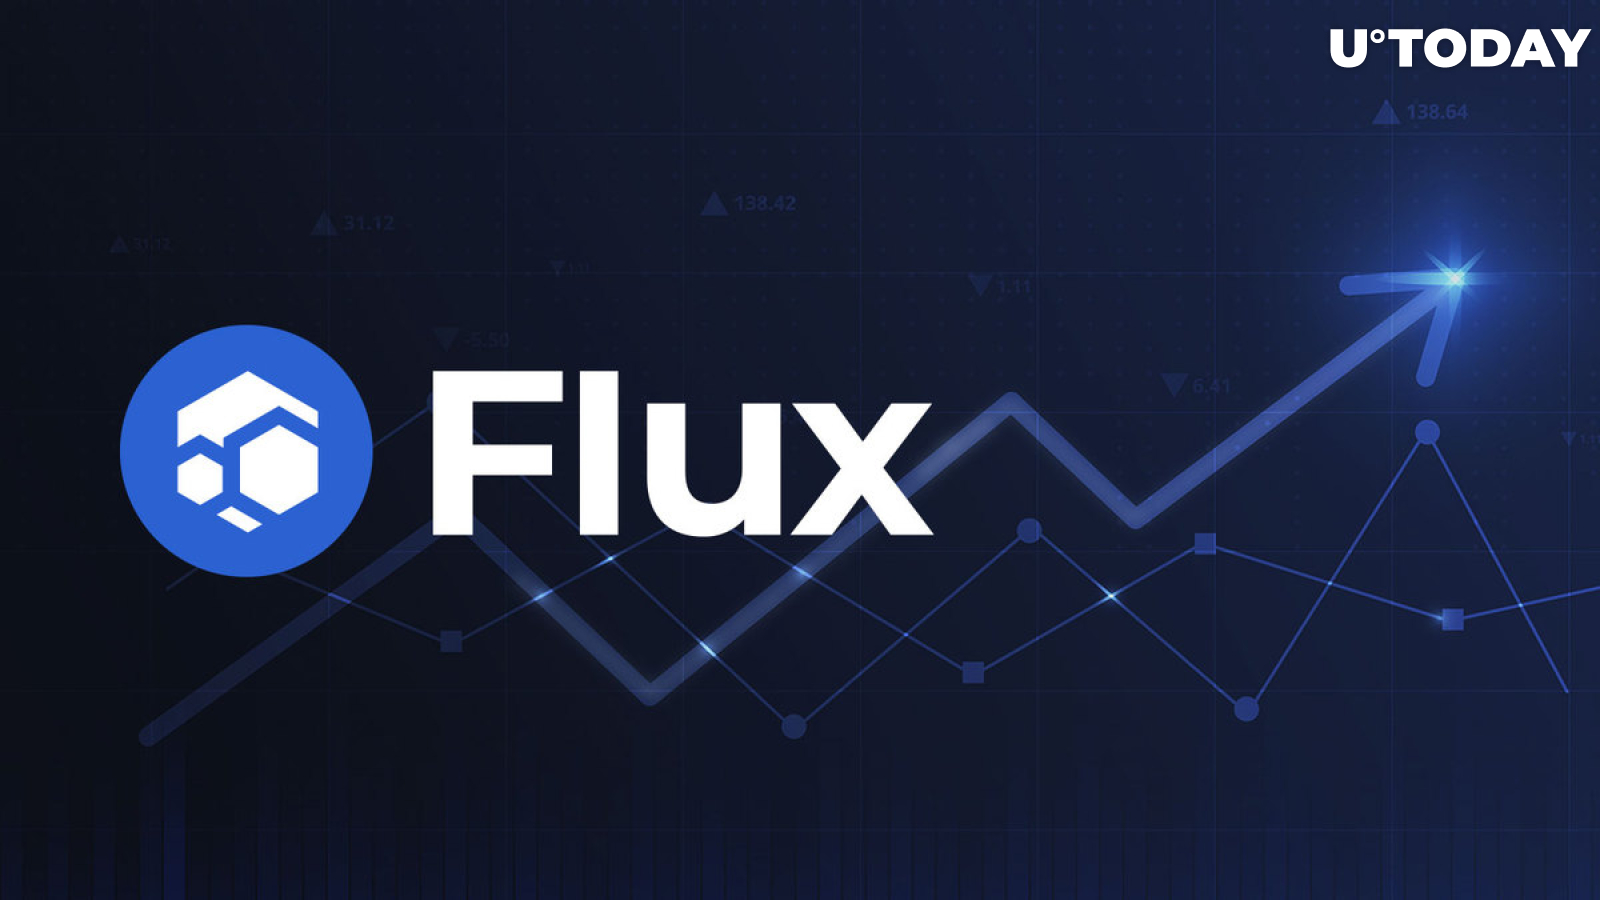 What Is Flux (FLUX), and Why Is It up 15% Today?